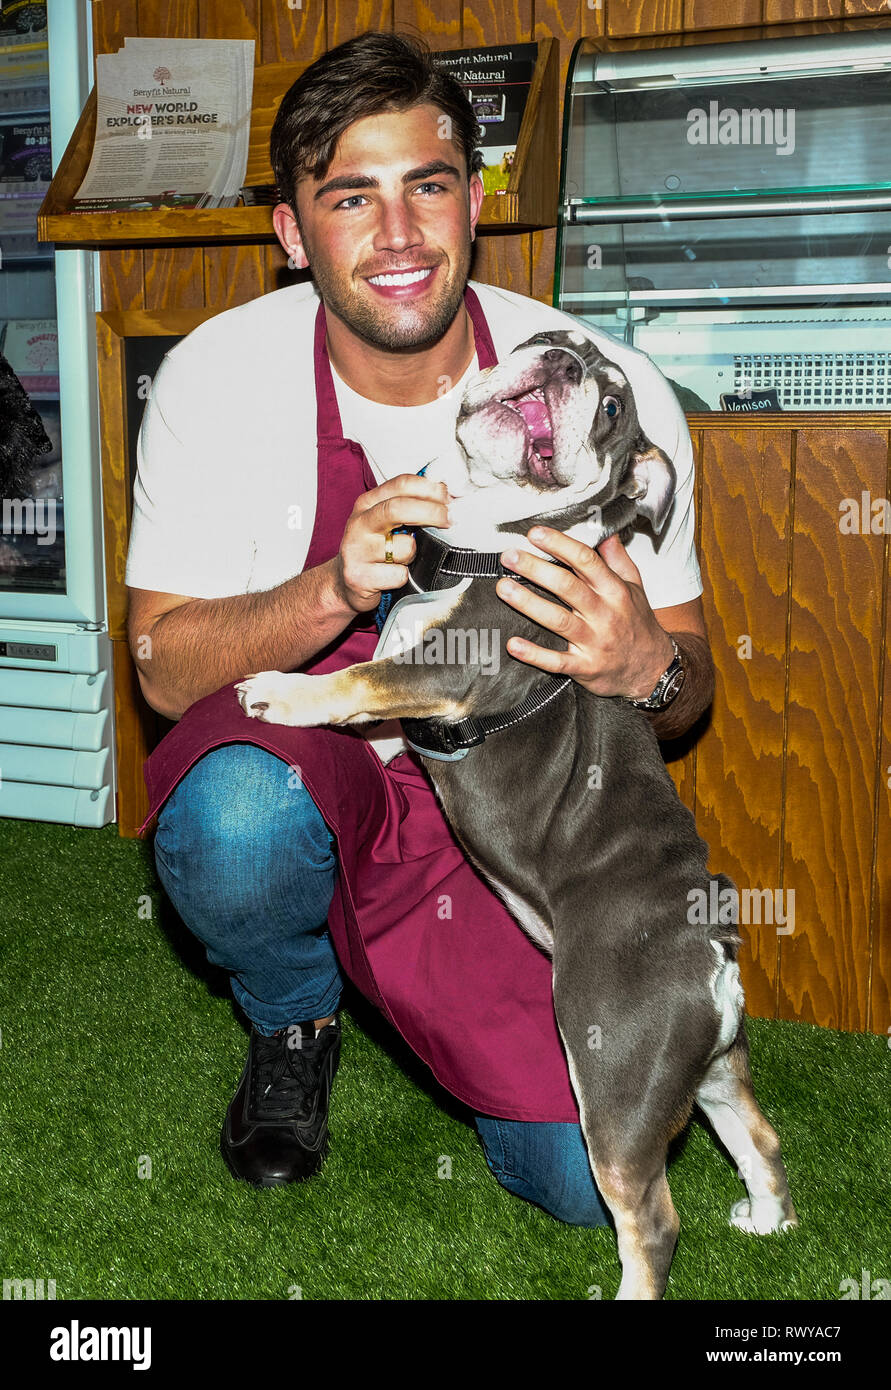 Birmingham, UK. 8th March, 2019. NEC Birmingham. Crufts Dog Show.Jack Fincham Love Island winner. together with his Bulldog on the Benyfit Natural stand Credit: charlie bryan/Alamy Live News Stock Photo